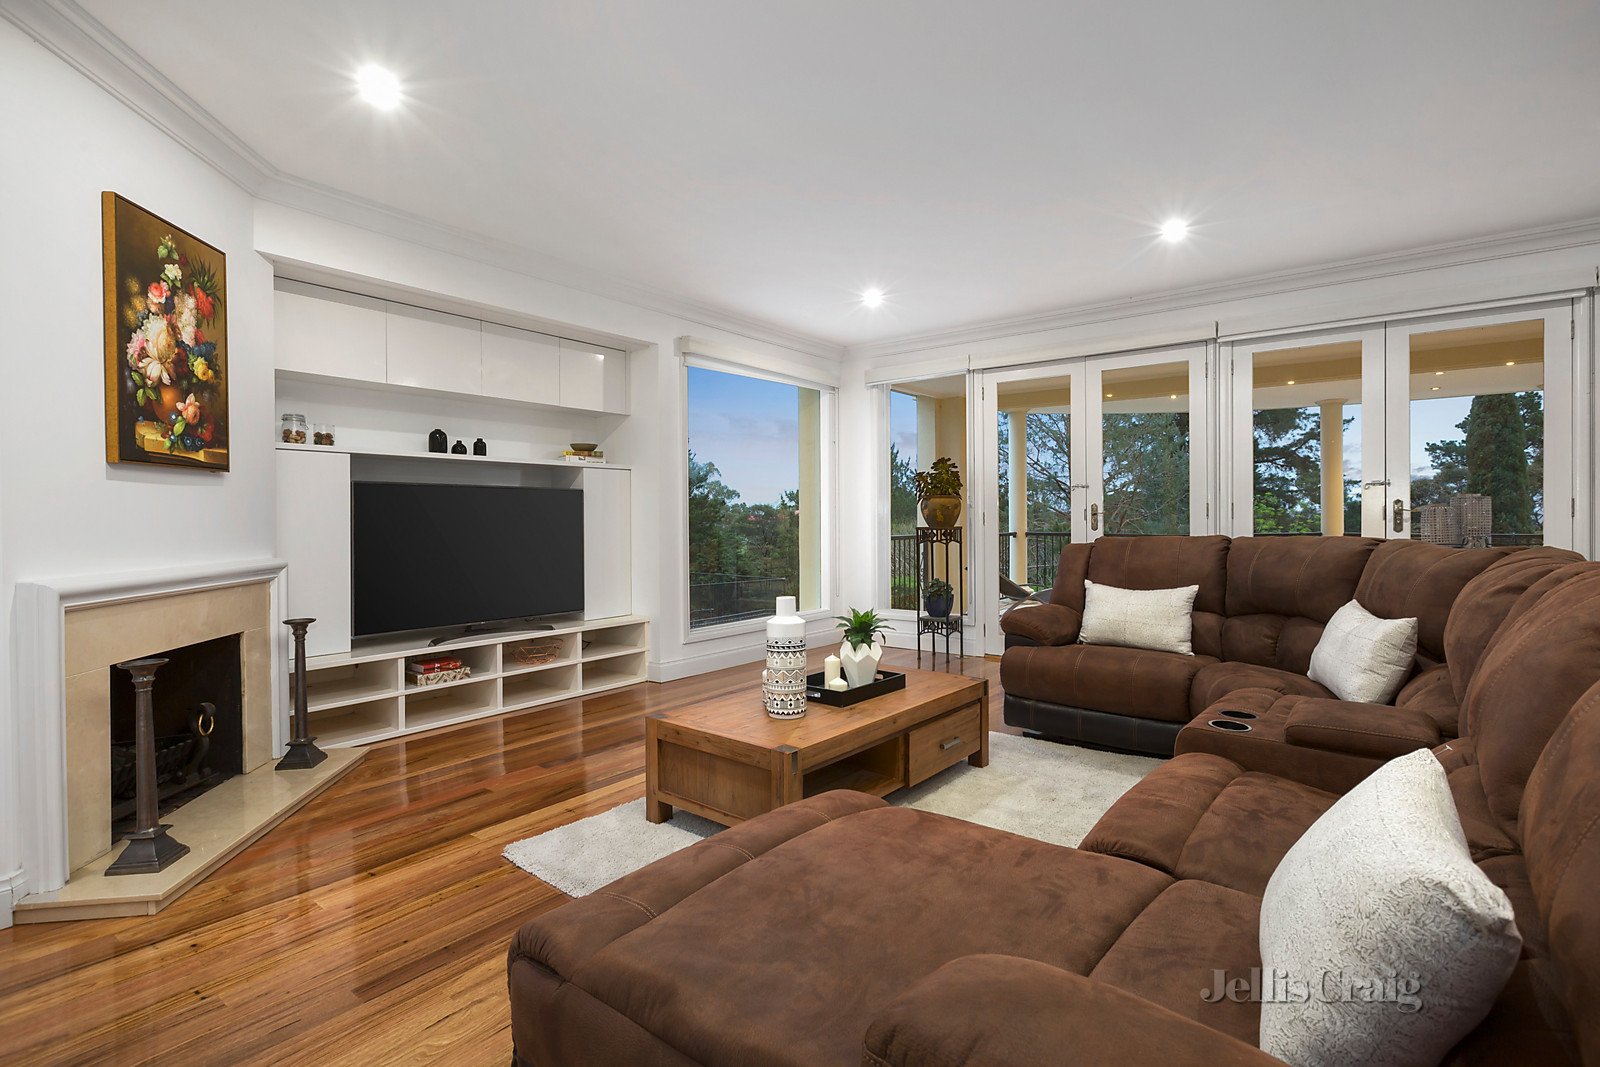 61-65 Newmans Road, Templestowe image 4